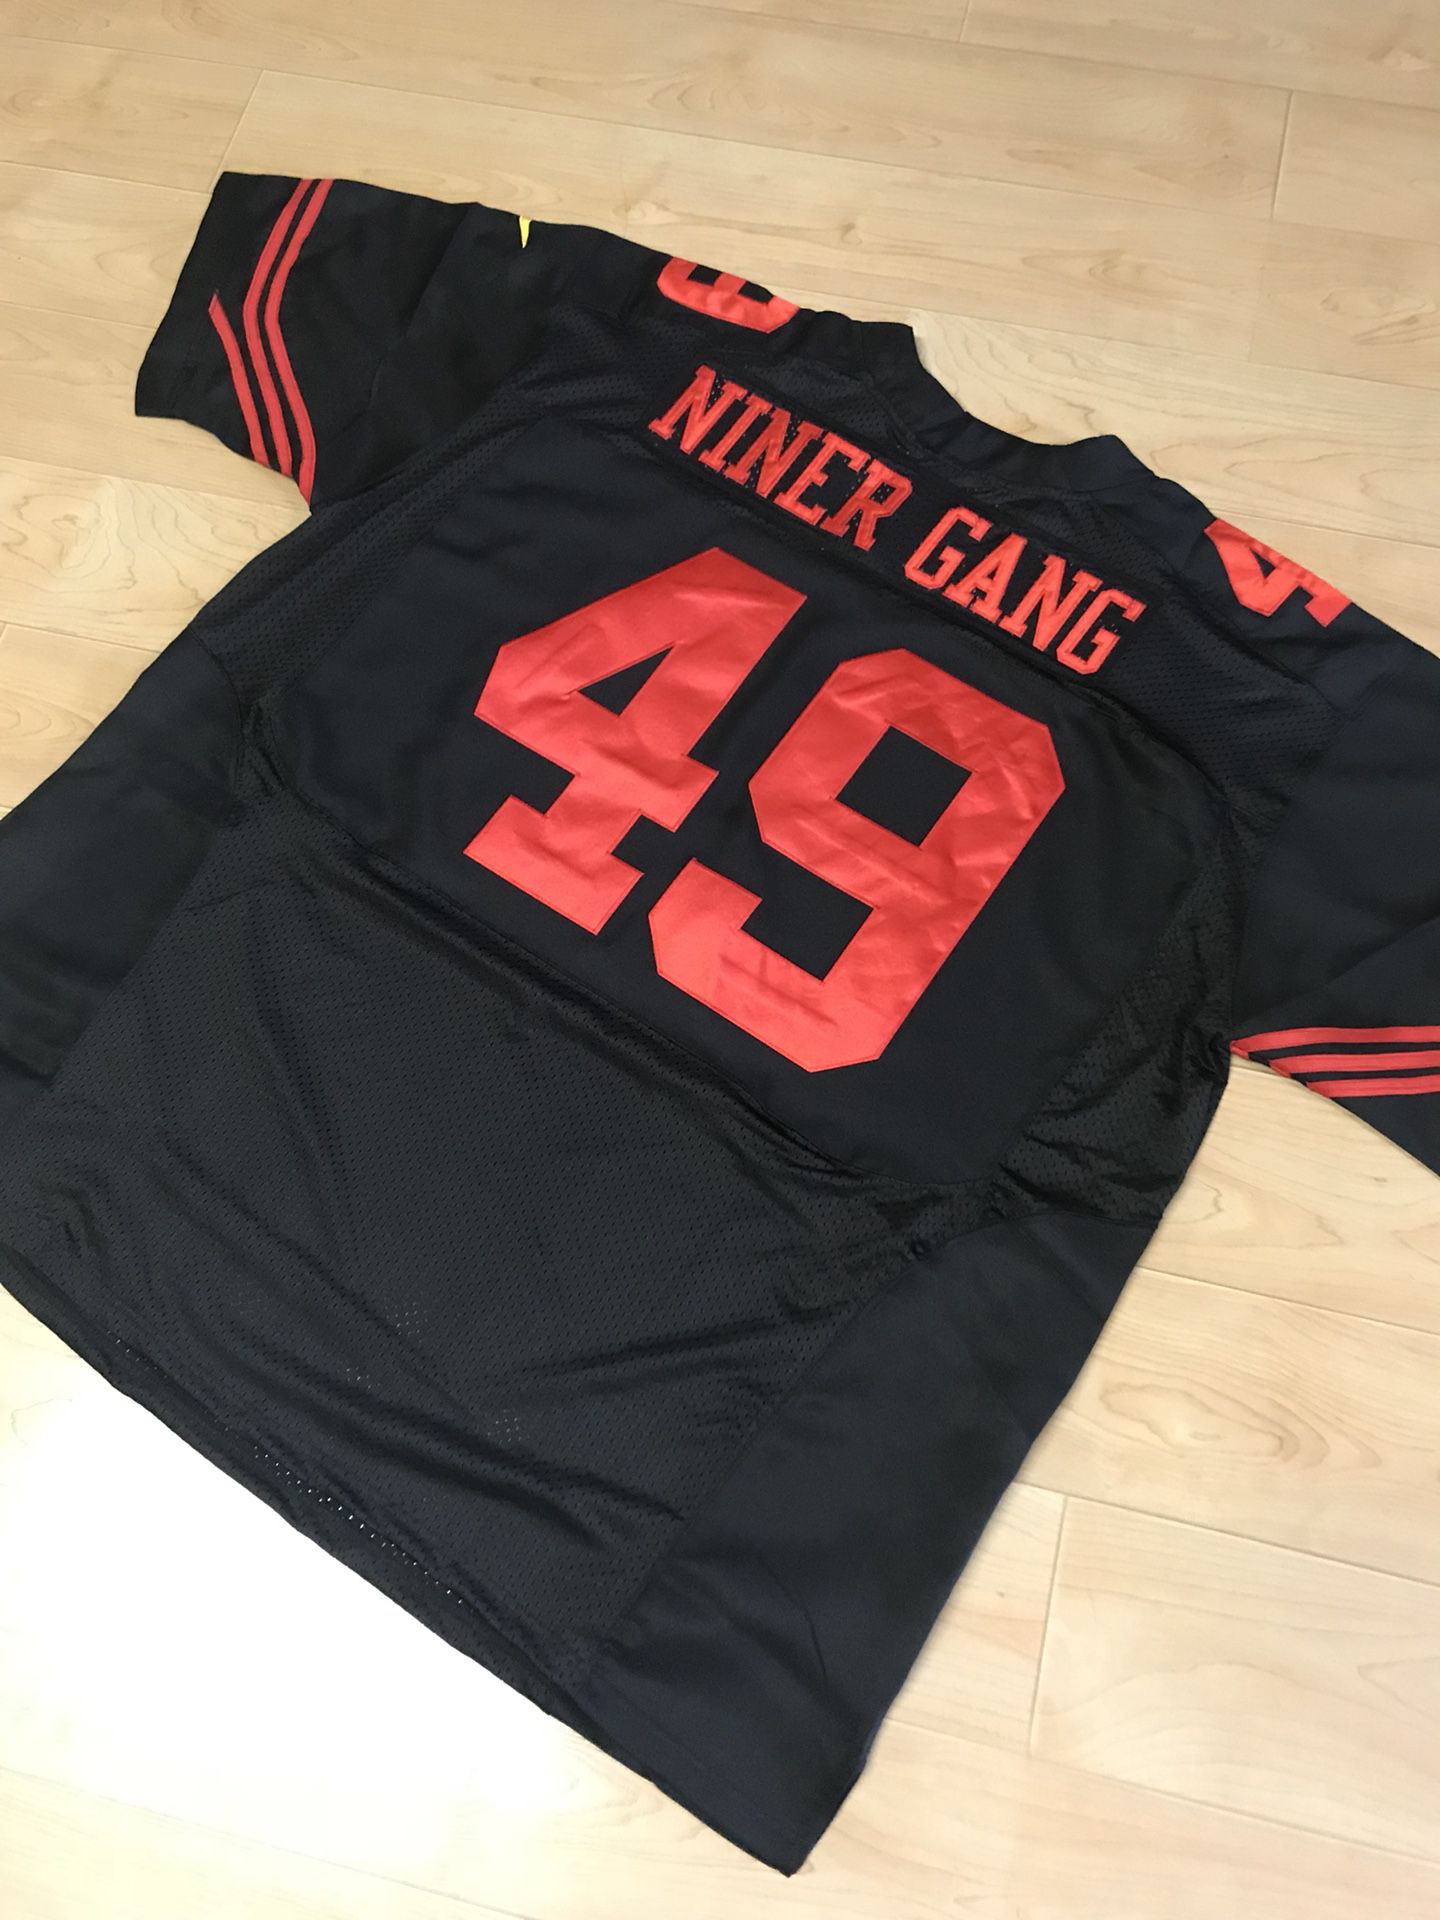 New customized 49ers jersey size 5XL for Sale in Daly City, CA - OfferUp